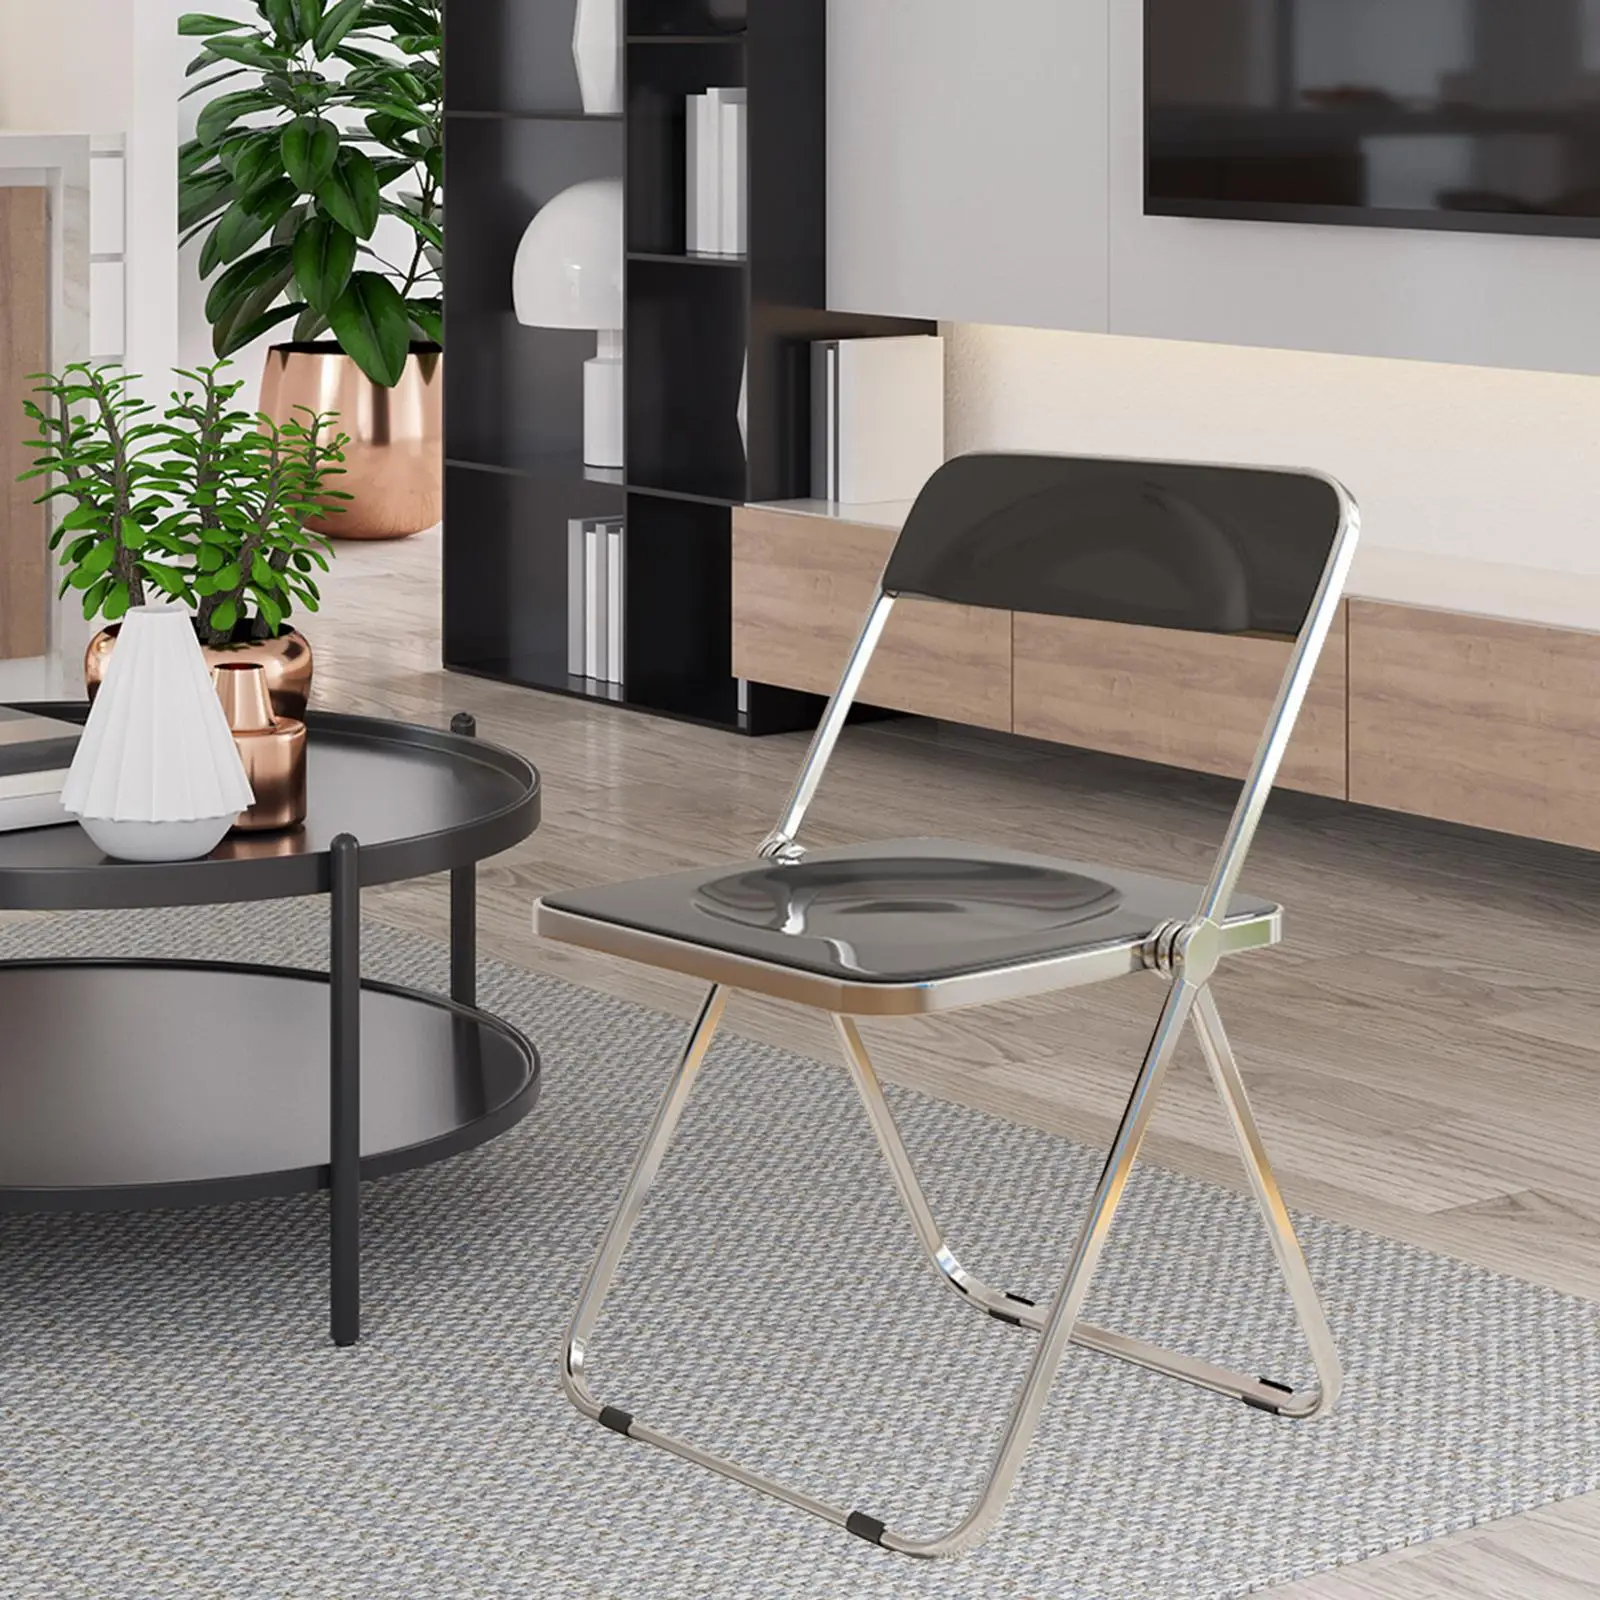 Acrylic Folding Chair Steel Frame Furniture Clothing Store Photo Chair Makeup Chair for inside Dining Room Office Home